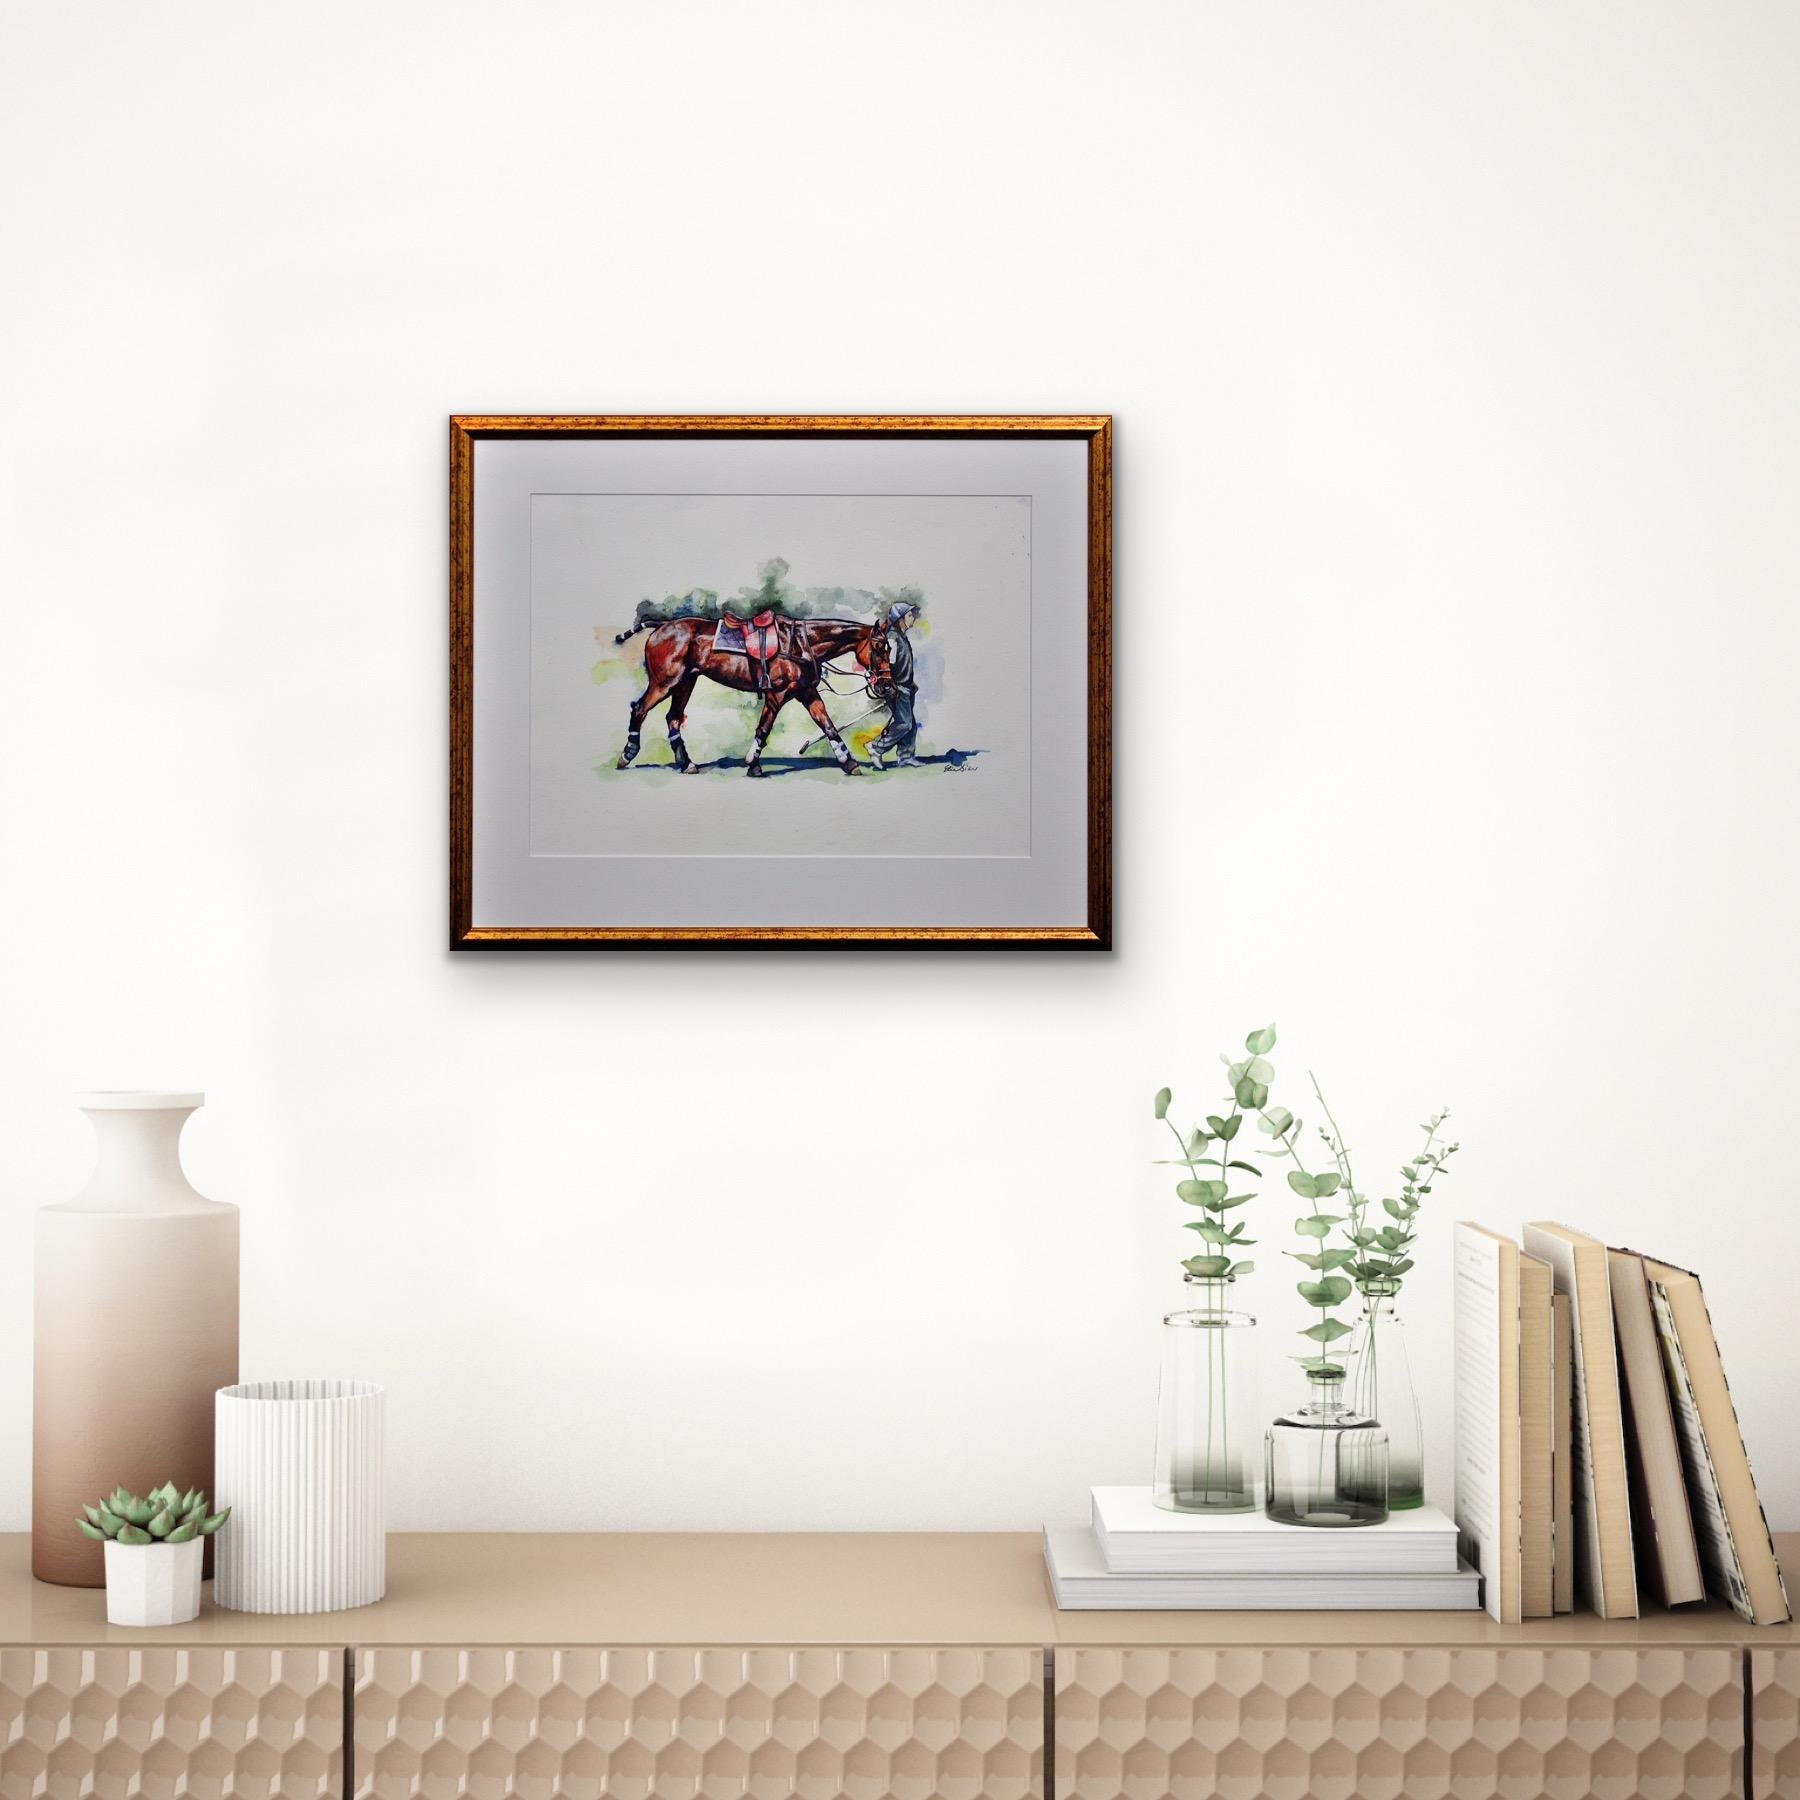 Polo Match, Cirencester, Player Leading Pony. Cotswolds. Framed Watercolor. For Sale 7